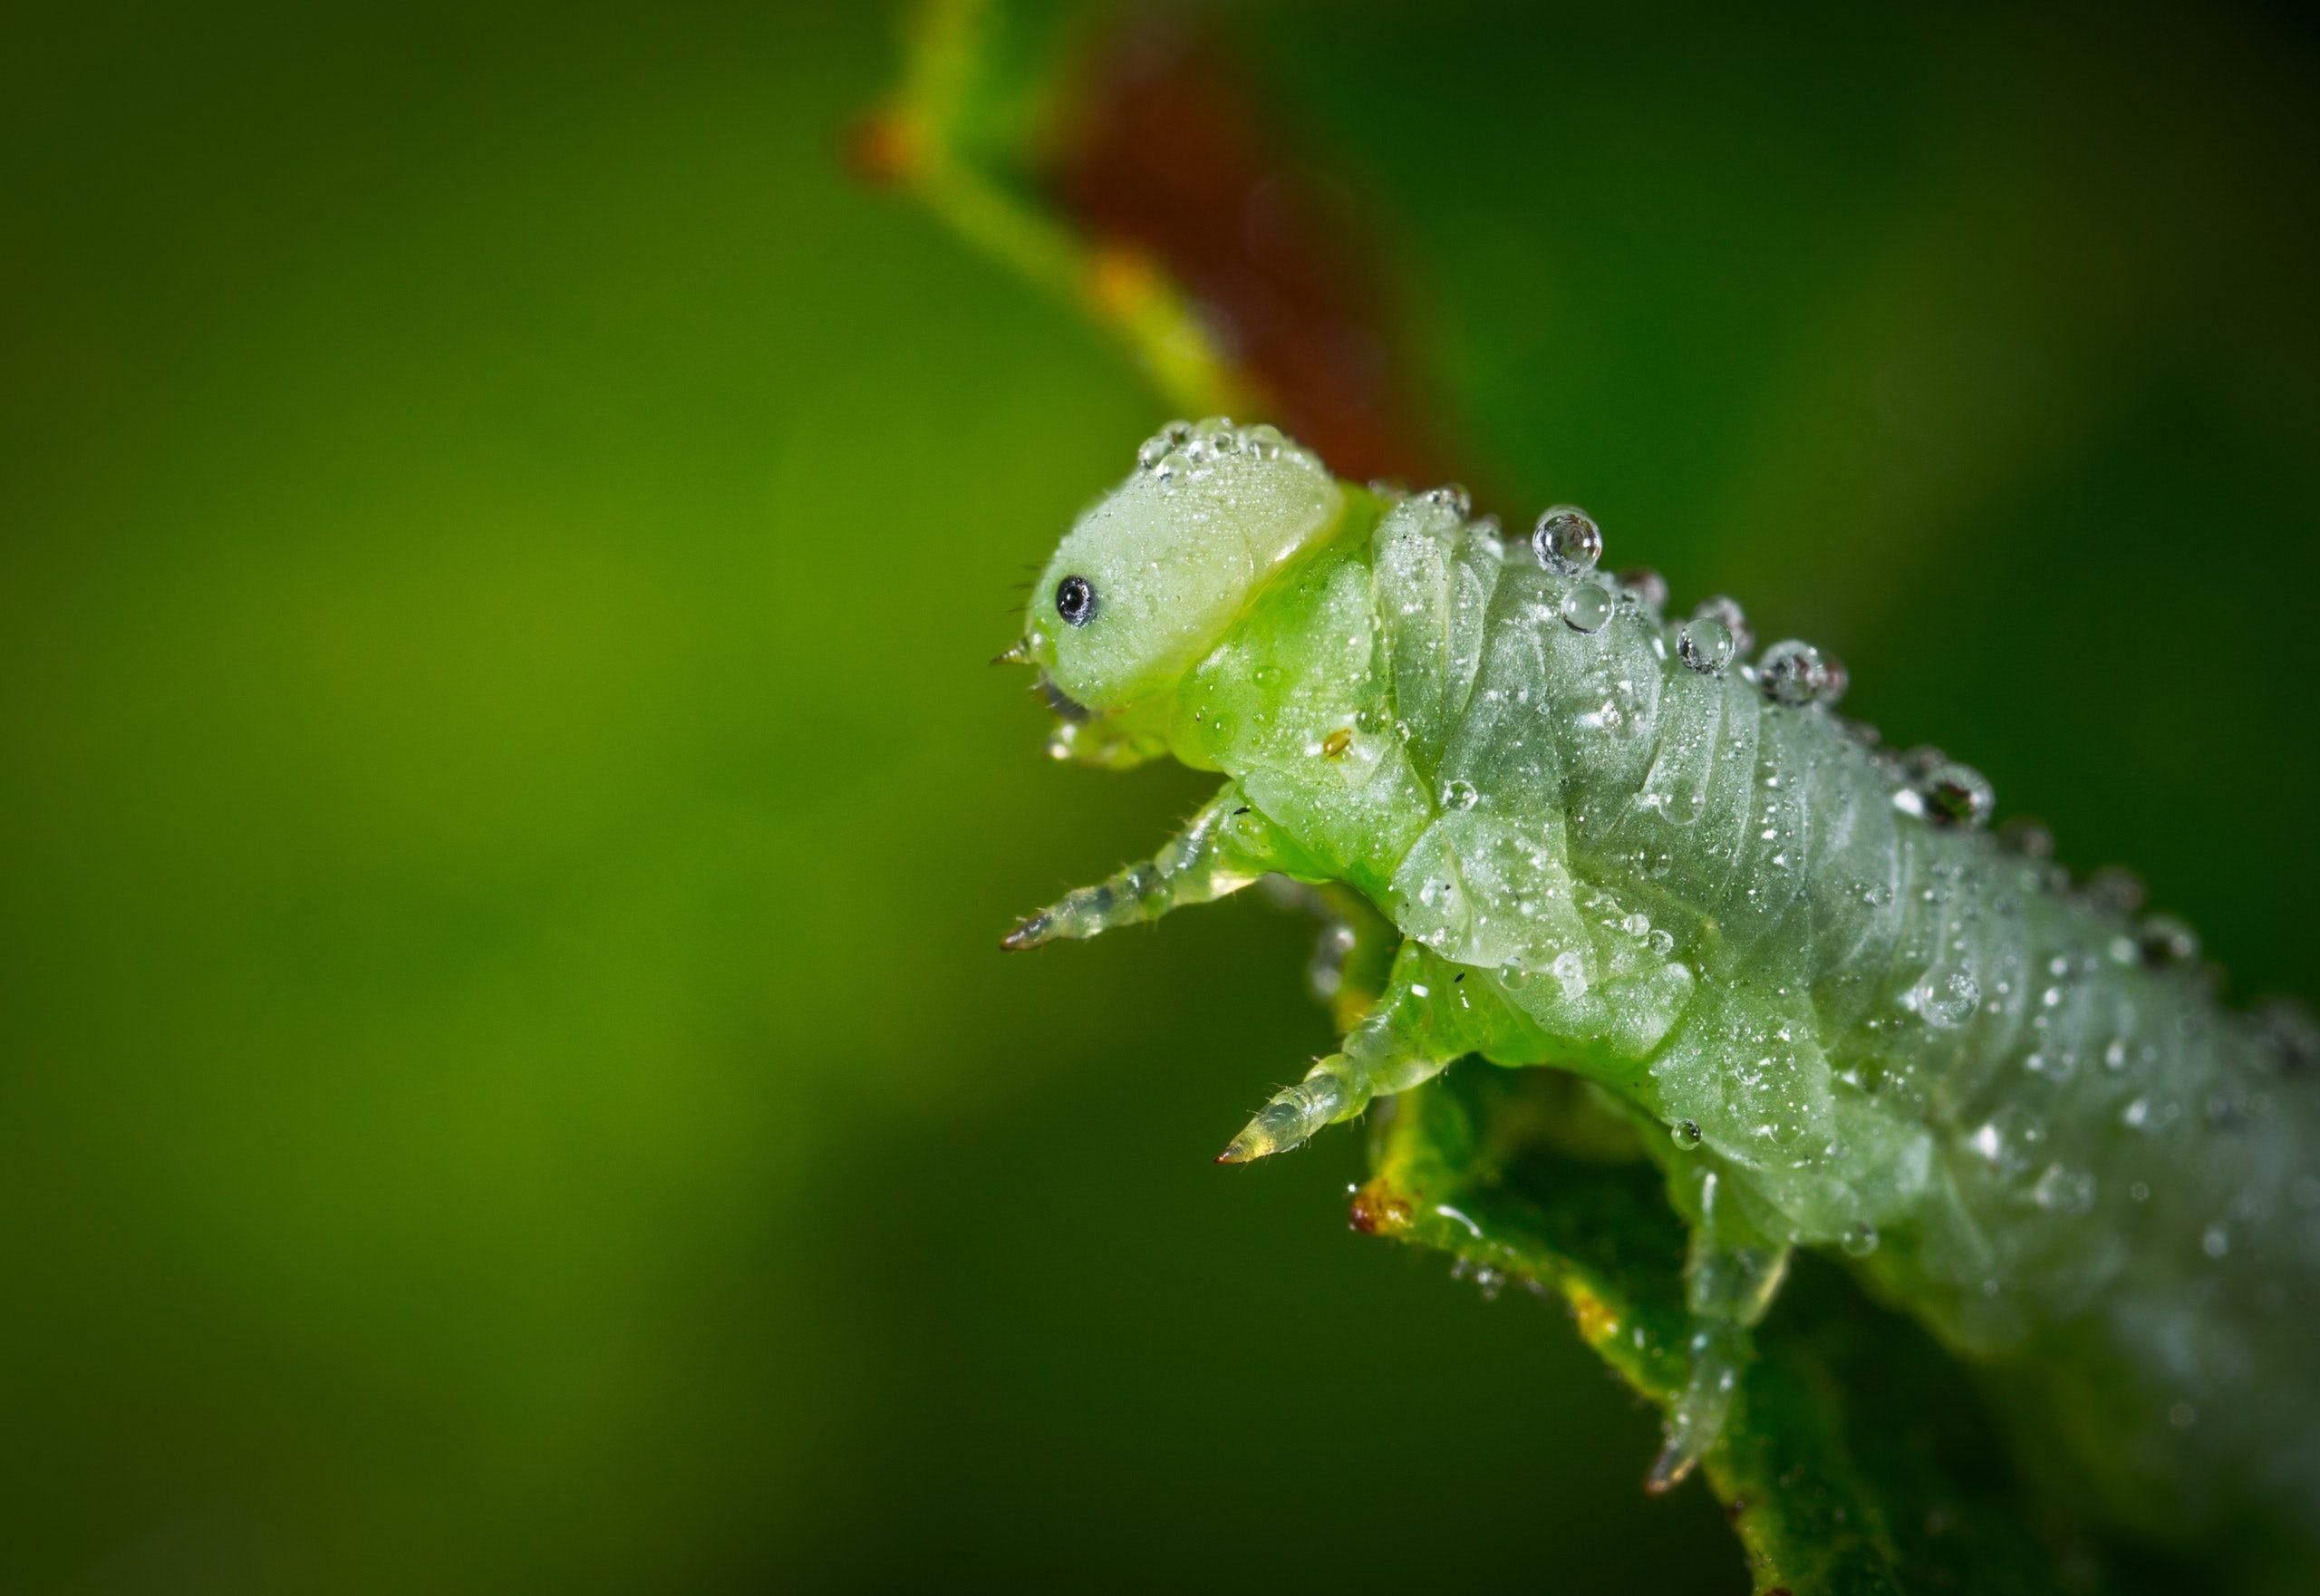 Caterpillars Insect Wallpaper Free HD Image for Download